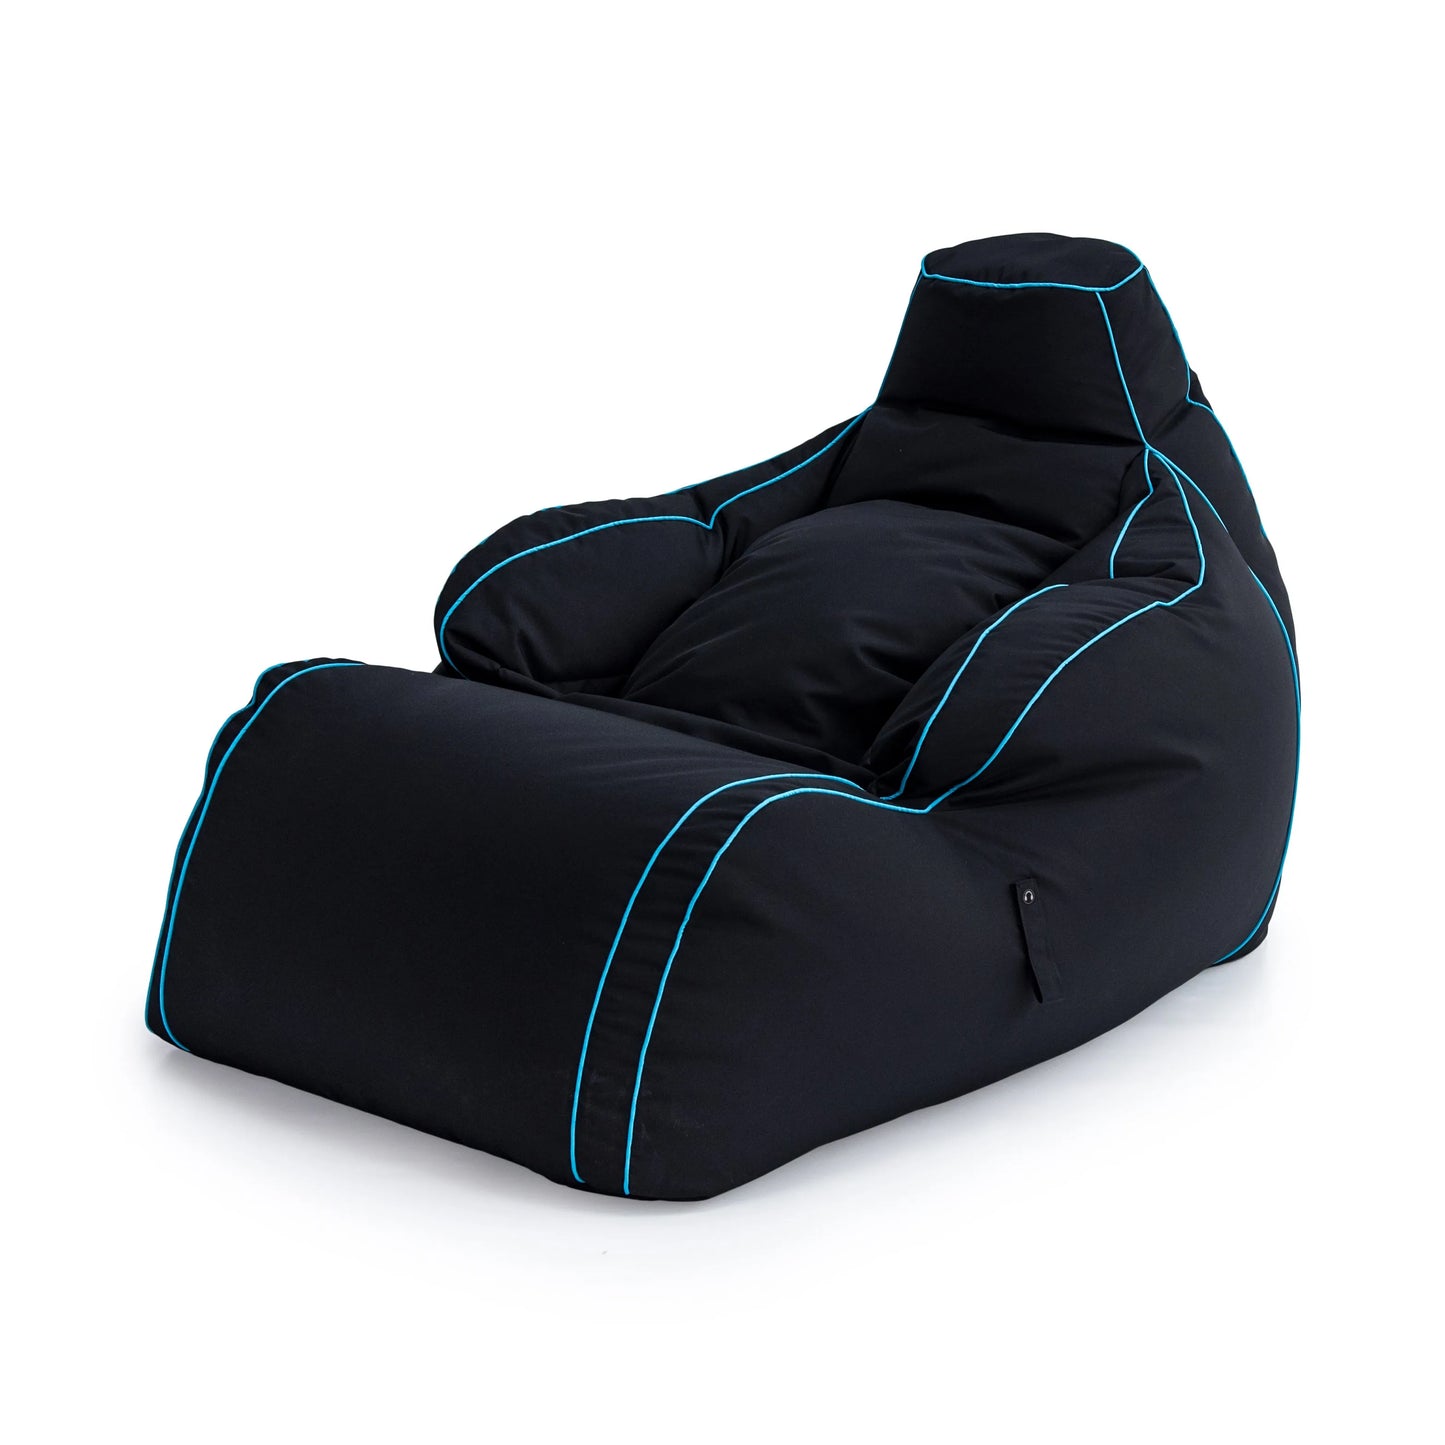 A black bean bag chair with blue stitching sits on a white background.